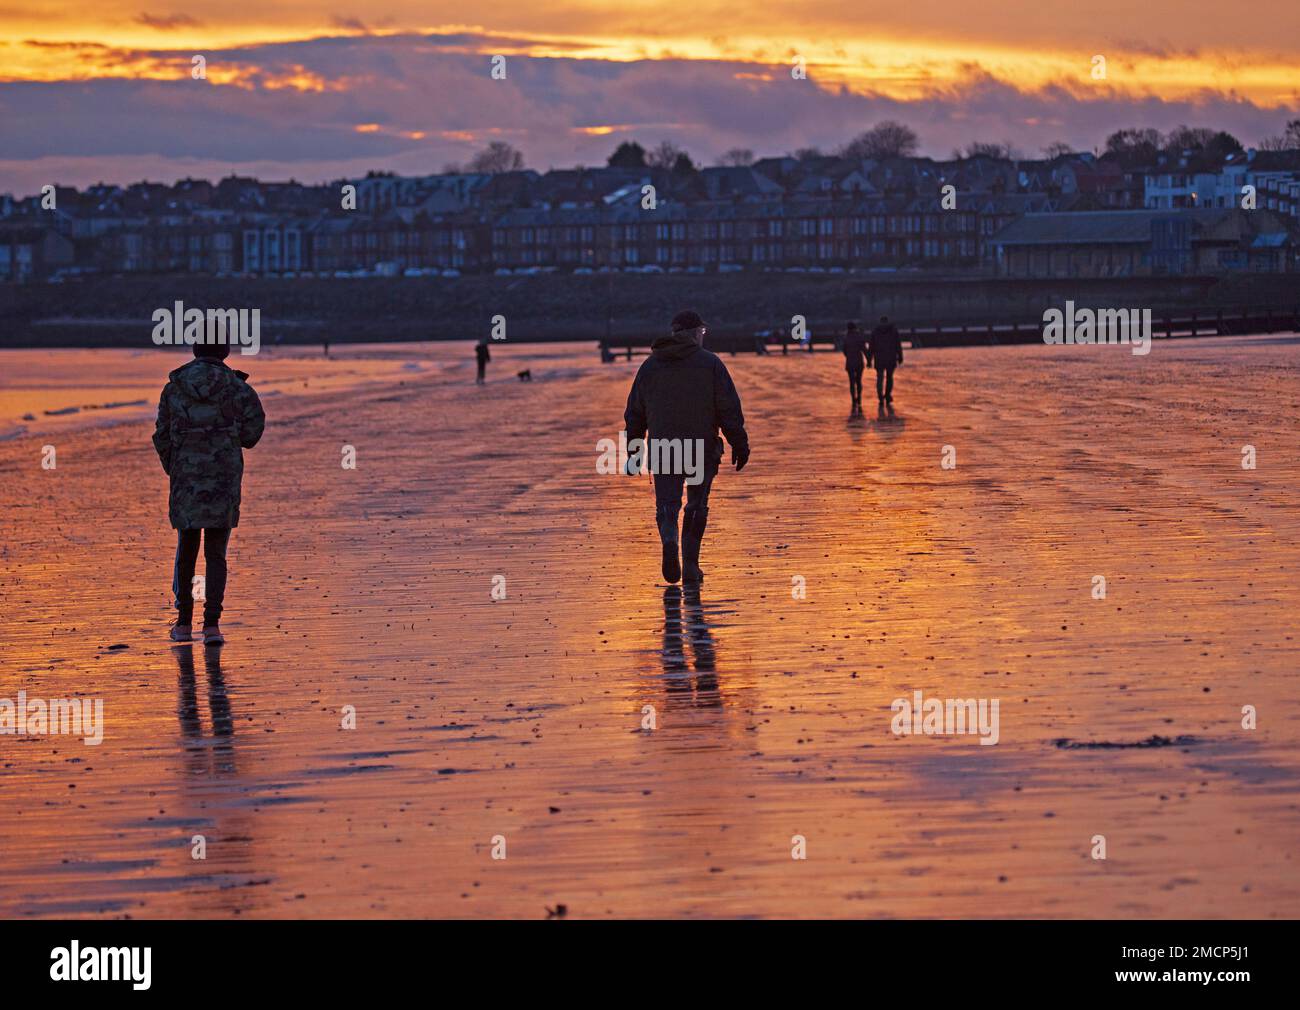 Portobello, Edinburgh, Scotland, UK. 22 January 2023. Fiery sunrise by the Firth of Forth with a slighlty milder but still nippy temperature of 5 degrees centigrade for those out and about at the seaside. Pictured: People take an early morning stroll along the shore. Credit: Scottishcreative/alamy live news. Stock Photo